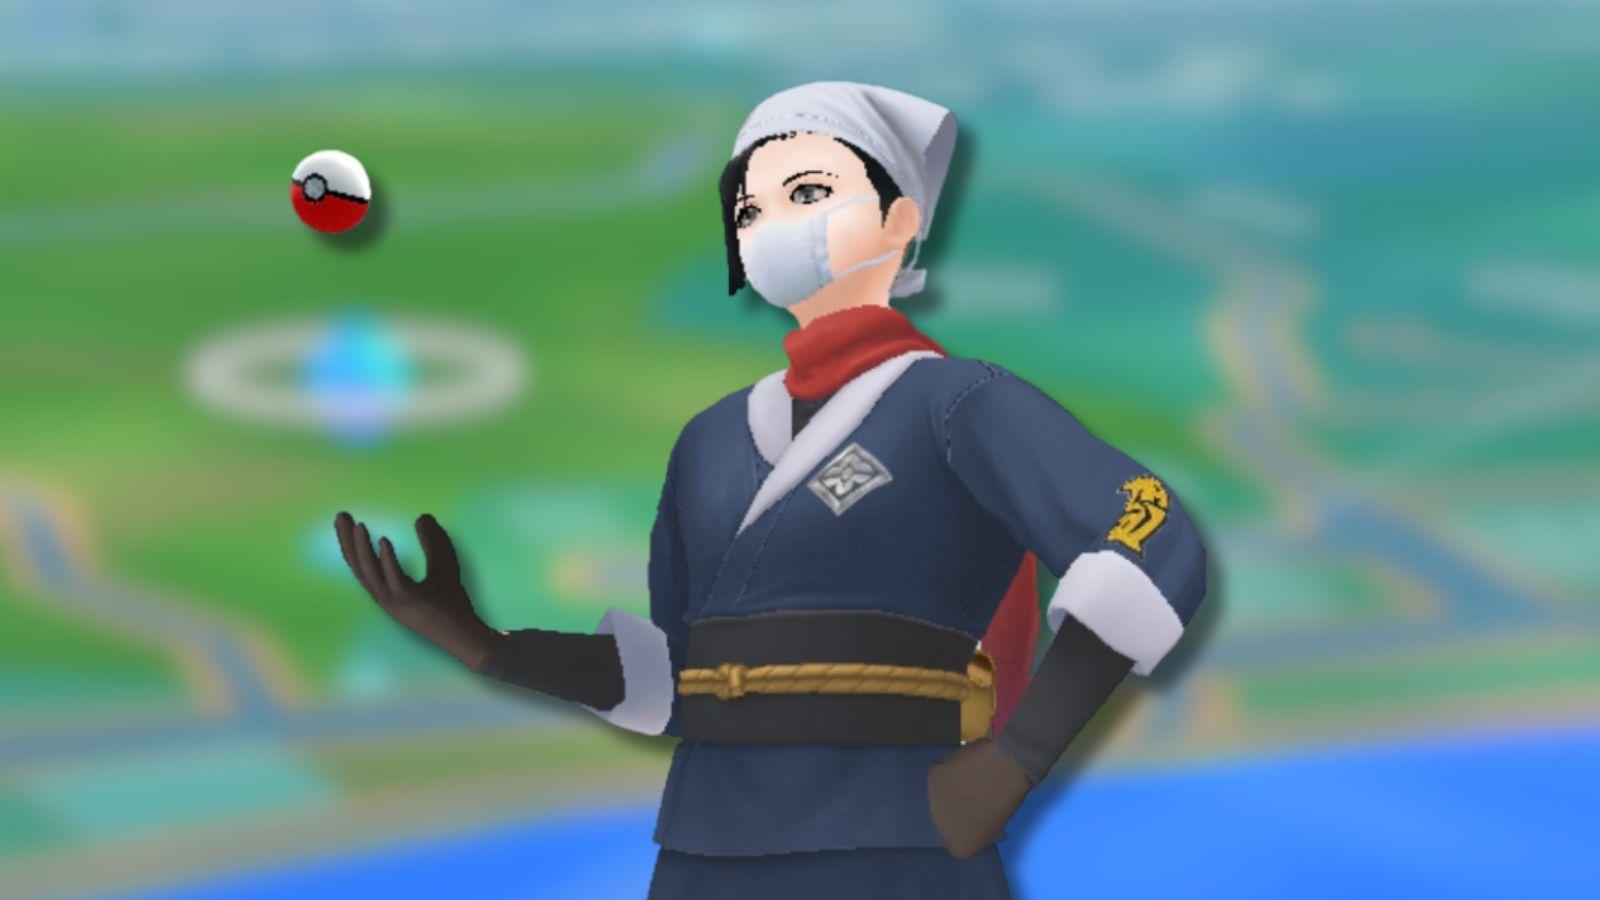 Pokemon Go player throwing Pokeball with map background.